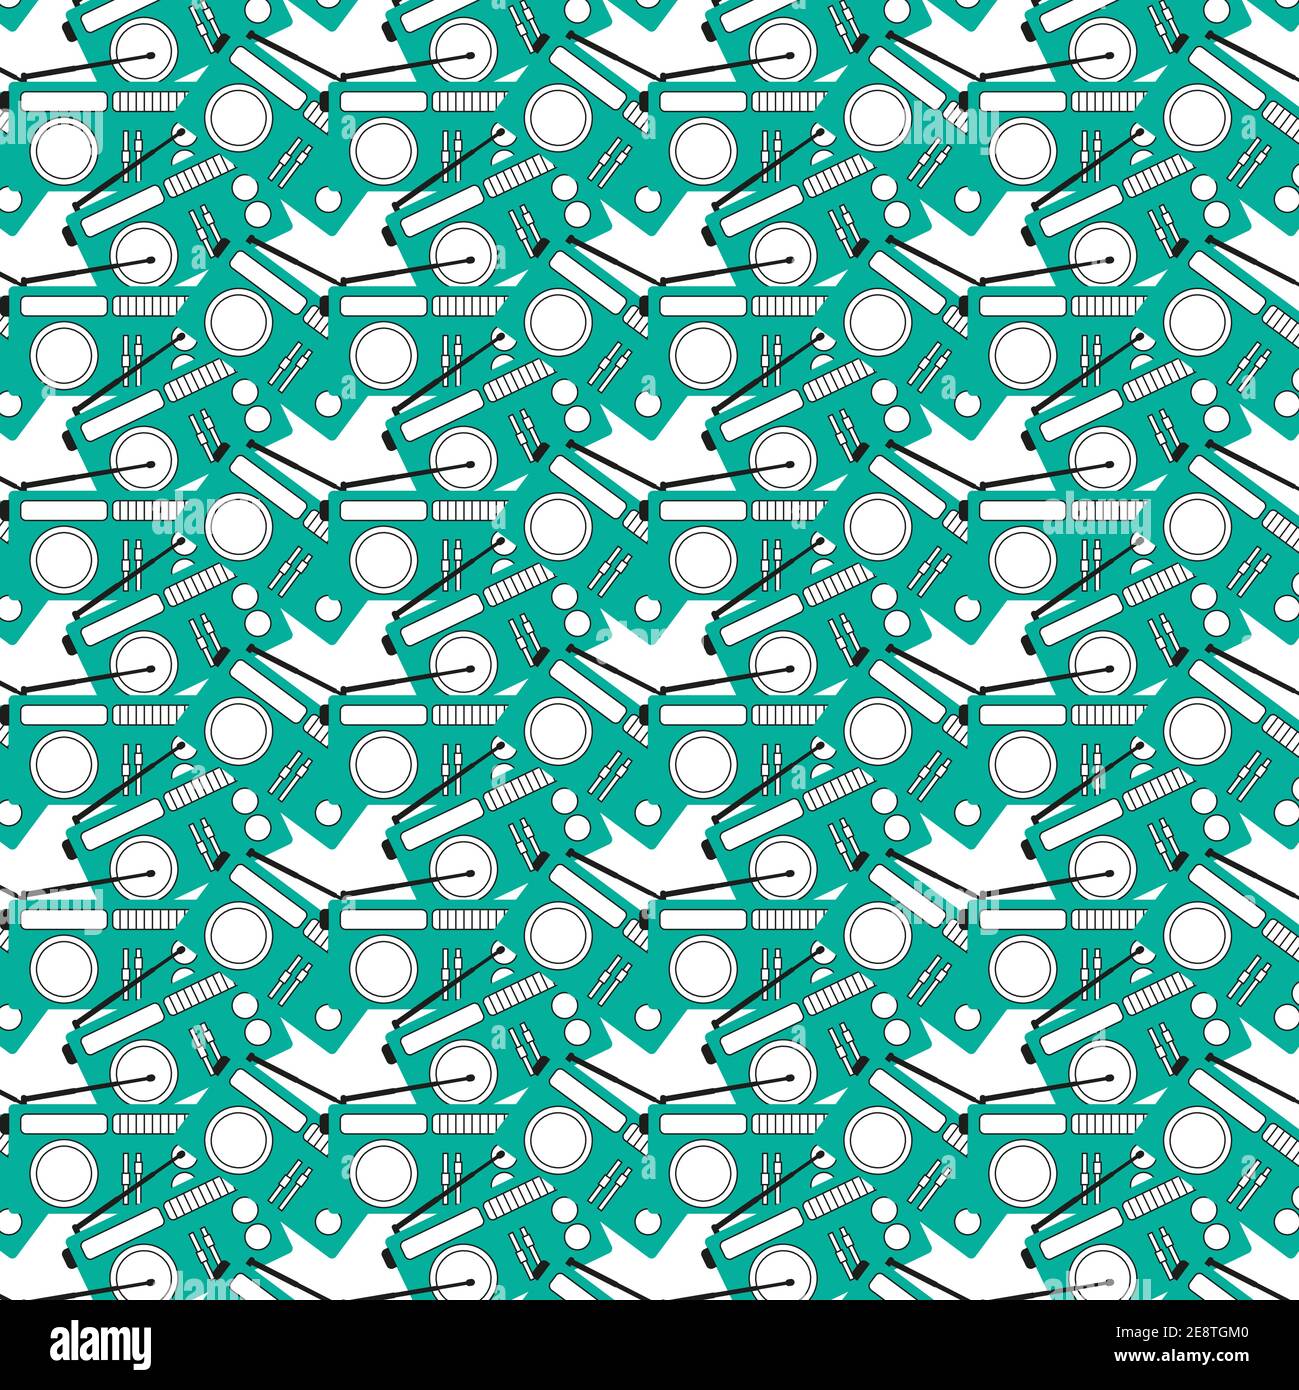 Retro radio seamless vector pattern on a white background Stock Vector